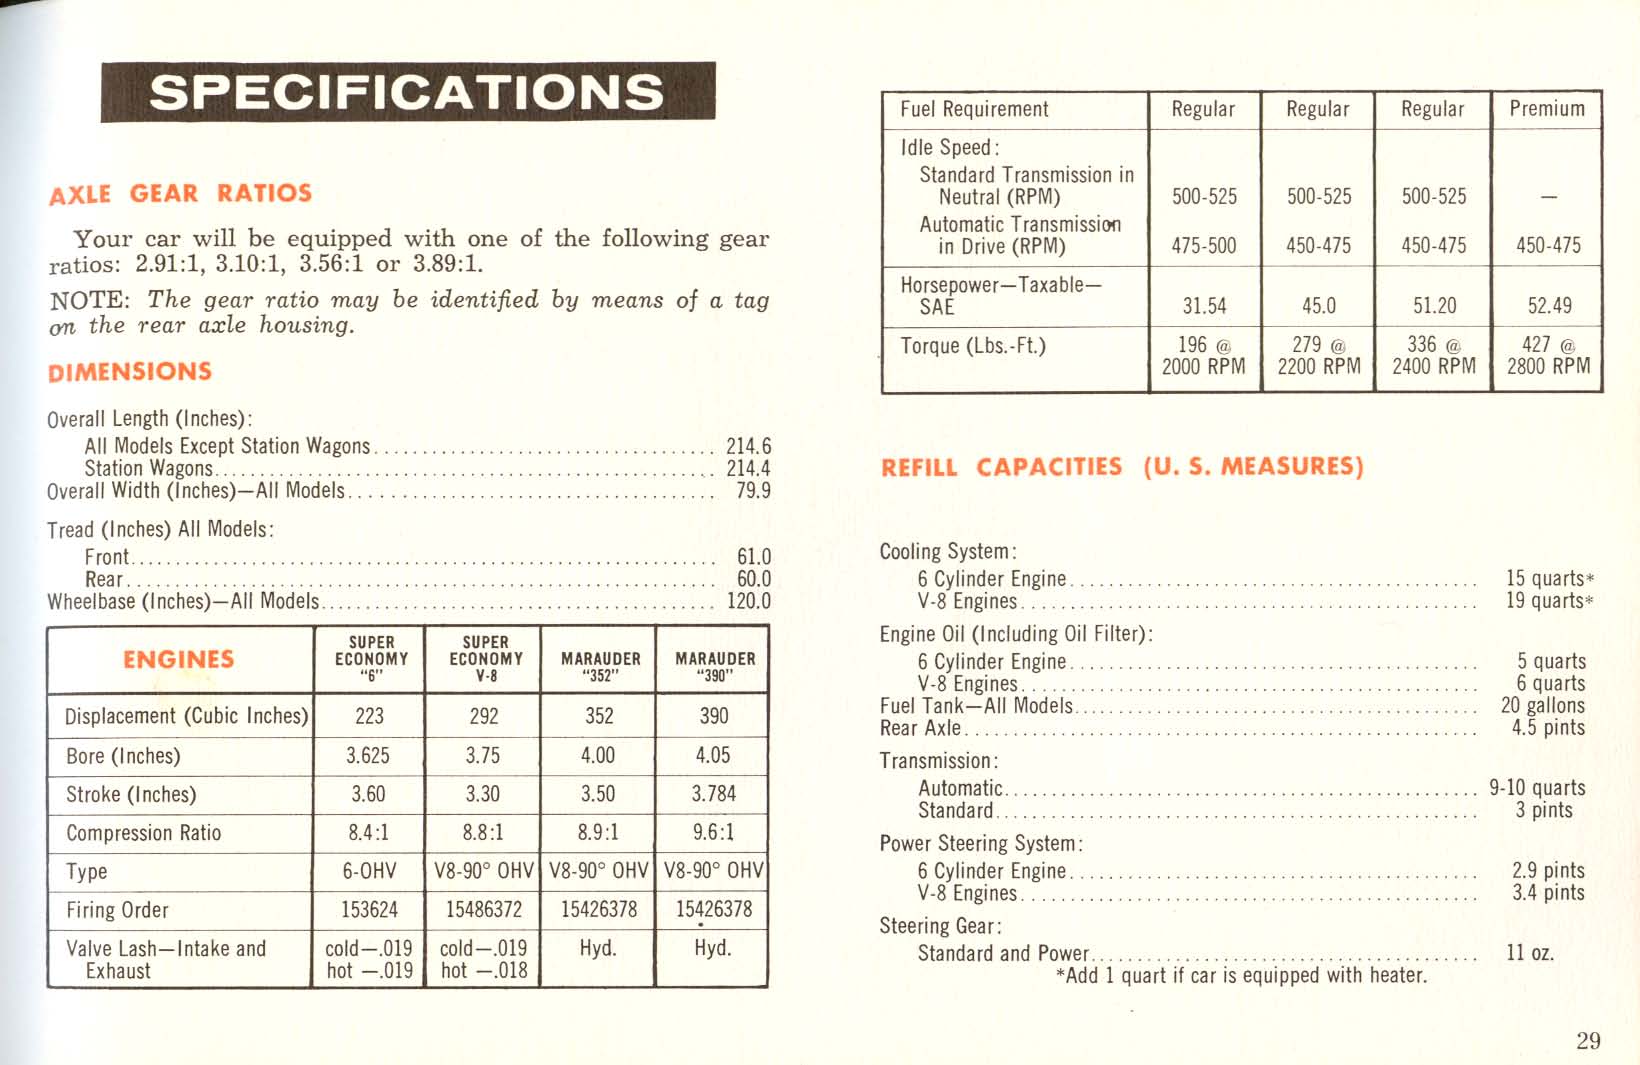 1961 Mercury Owners Manual Page 15